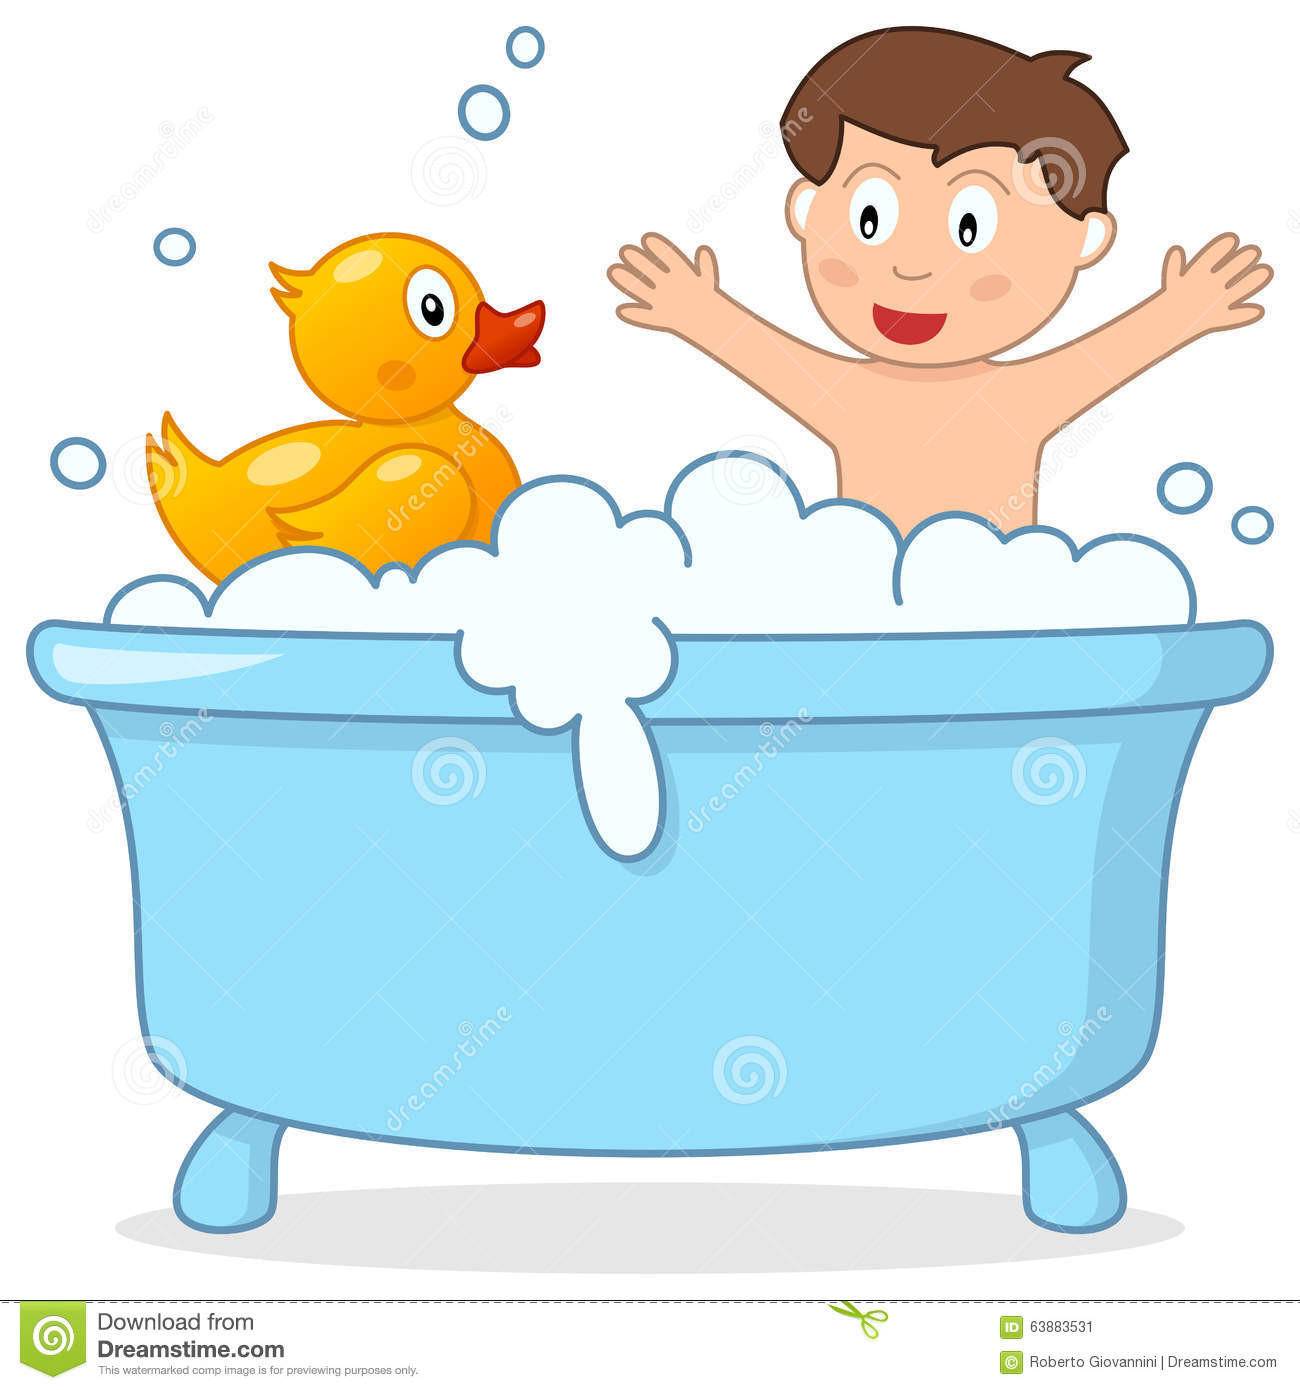 Bathroom Clipart For Kids
 Bath Time With Little Boy & Rubber Duck Stock Vector